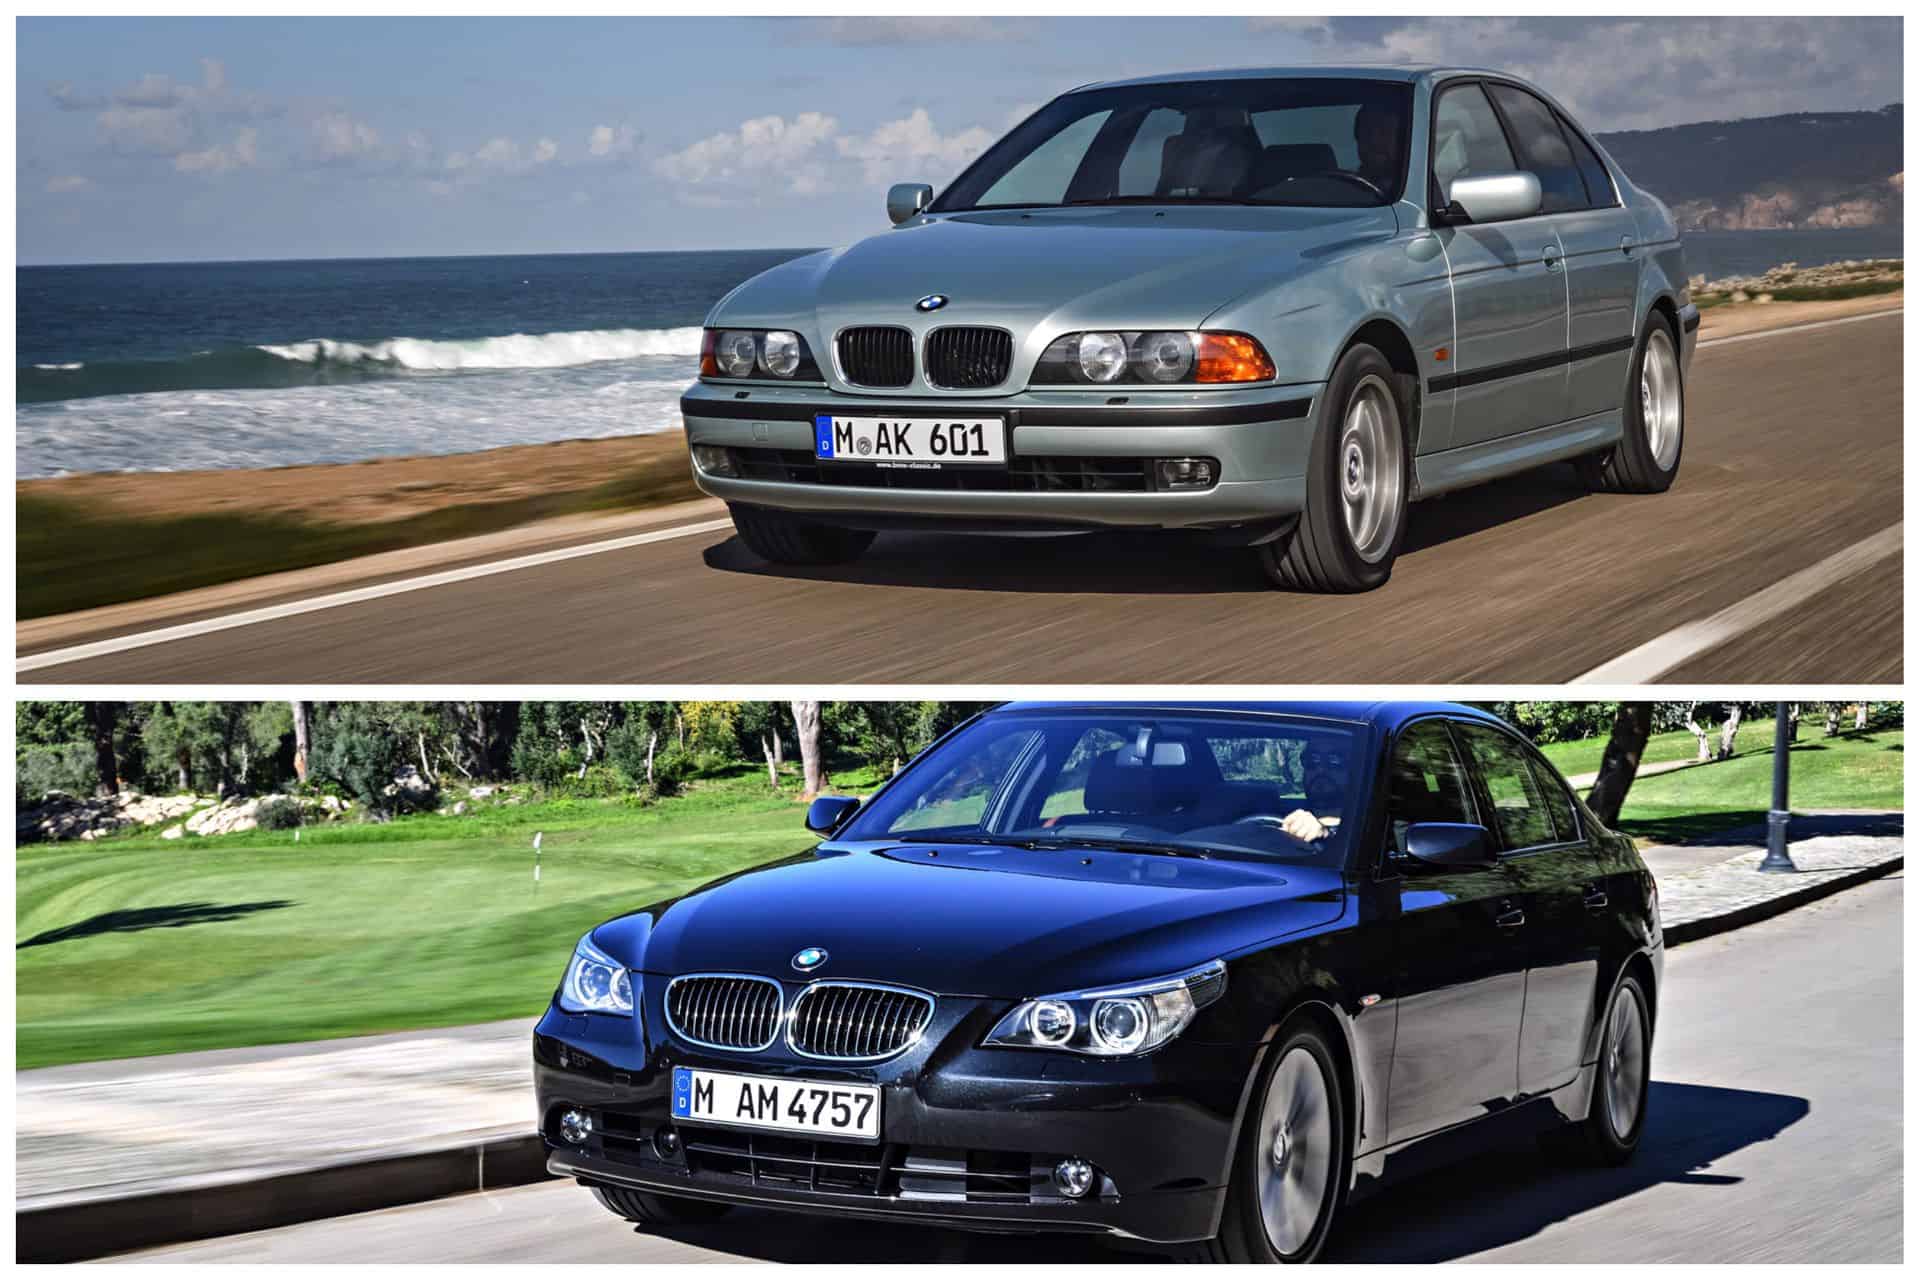 20 Years of the E60 BMW 5 Series